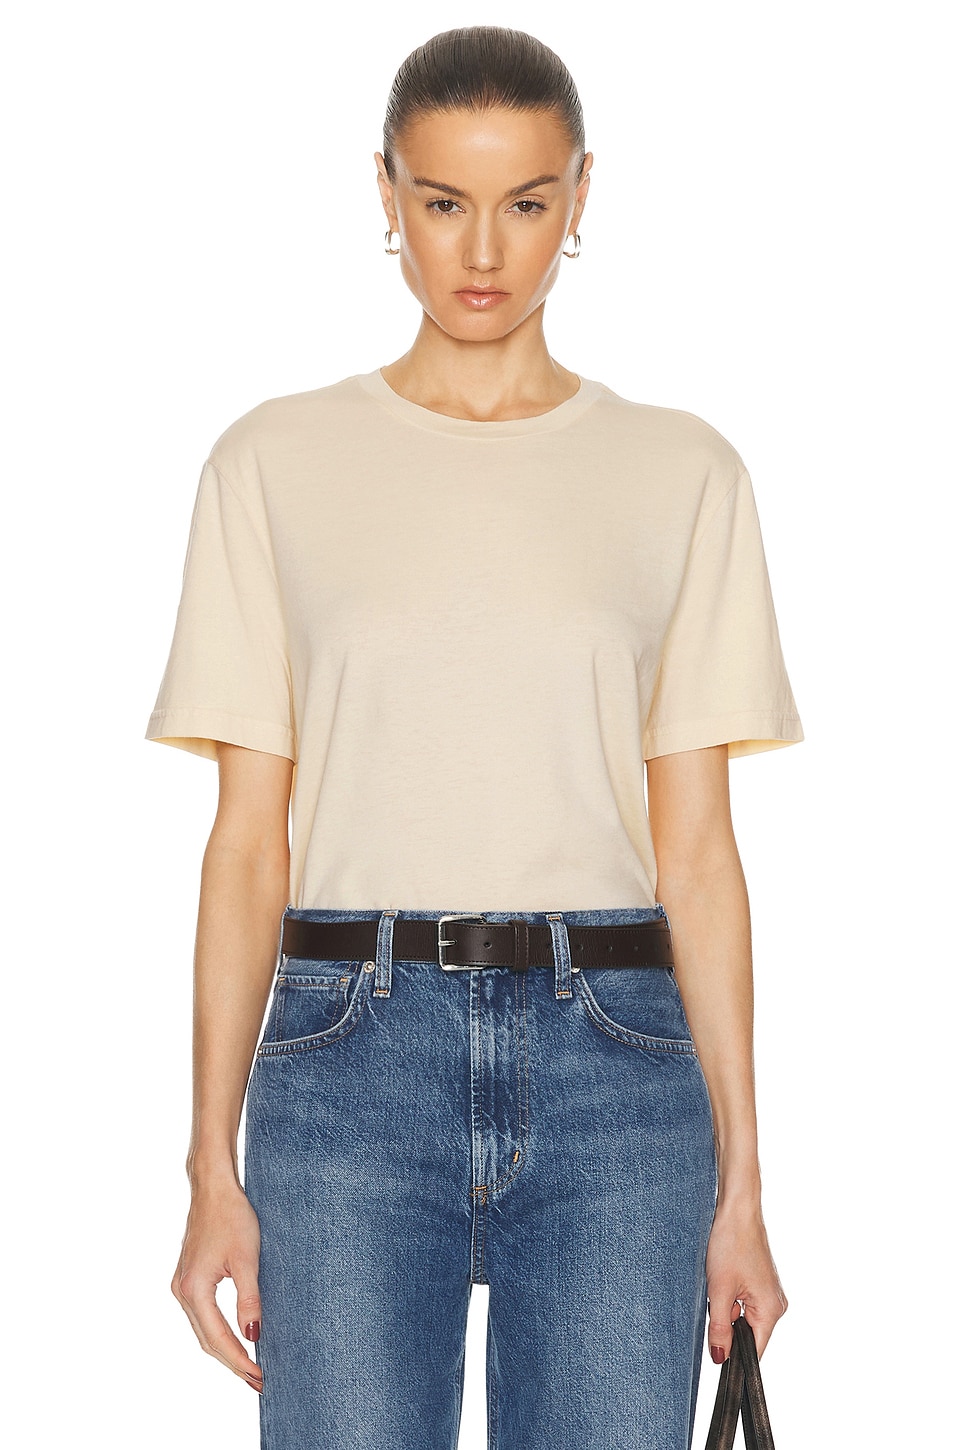 Image 1 of WAO The Standard Tee in natural